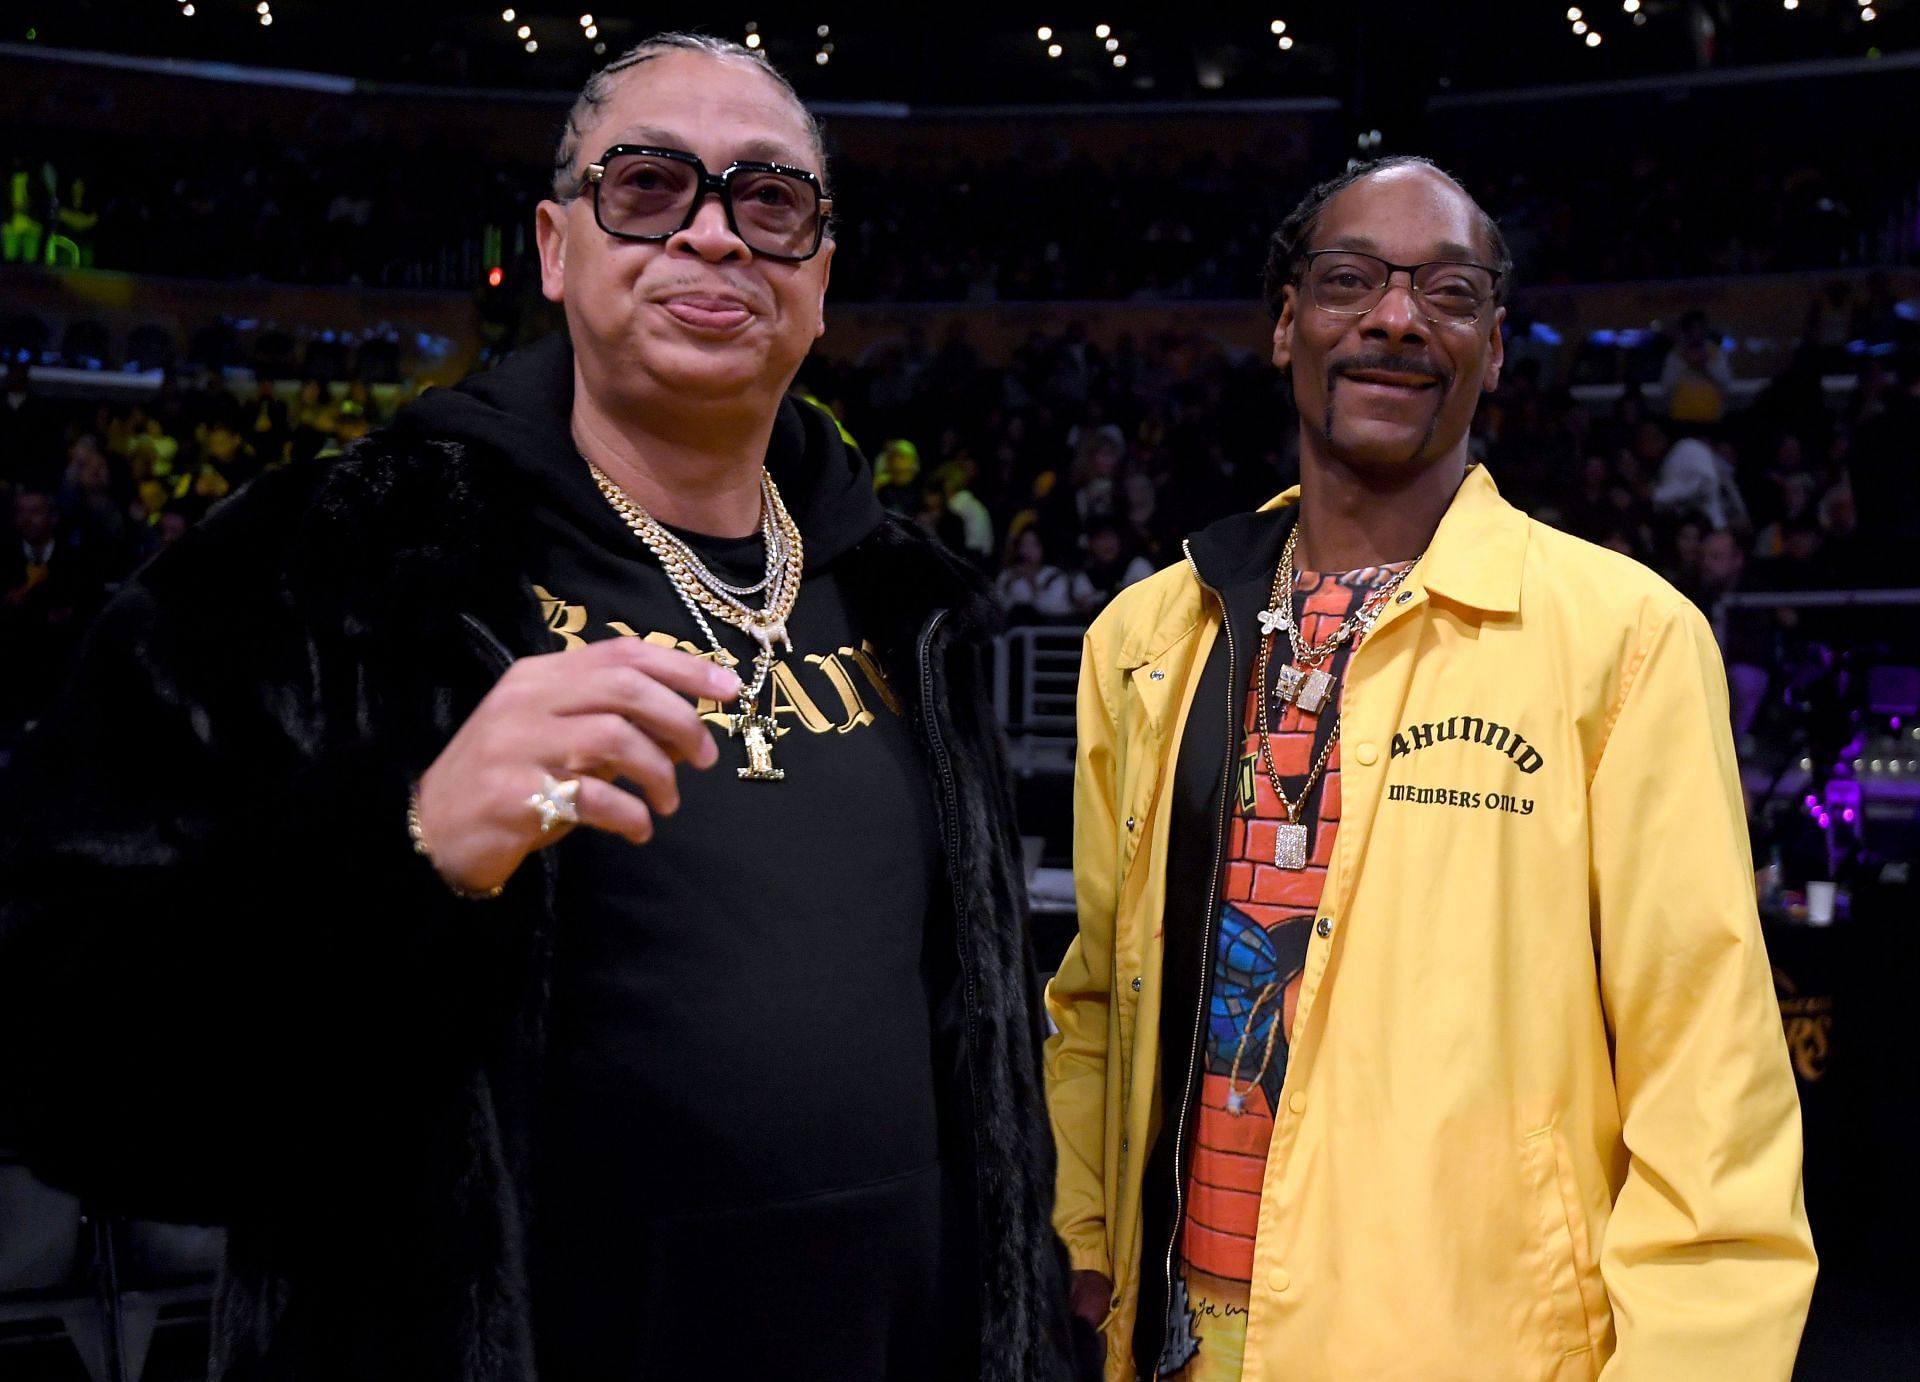 Snoop Dogg, right, and manager Big Percy courtside before the game between the Golden State Warriors and the LA Lakers at Staples Center on January 21, 2019, in Los Angeles, California.